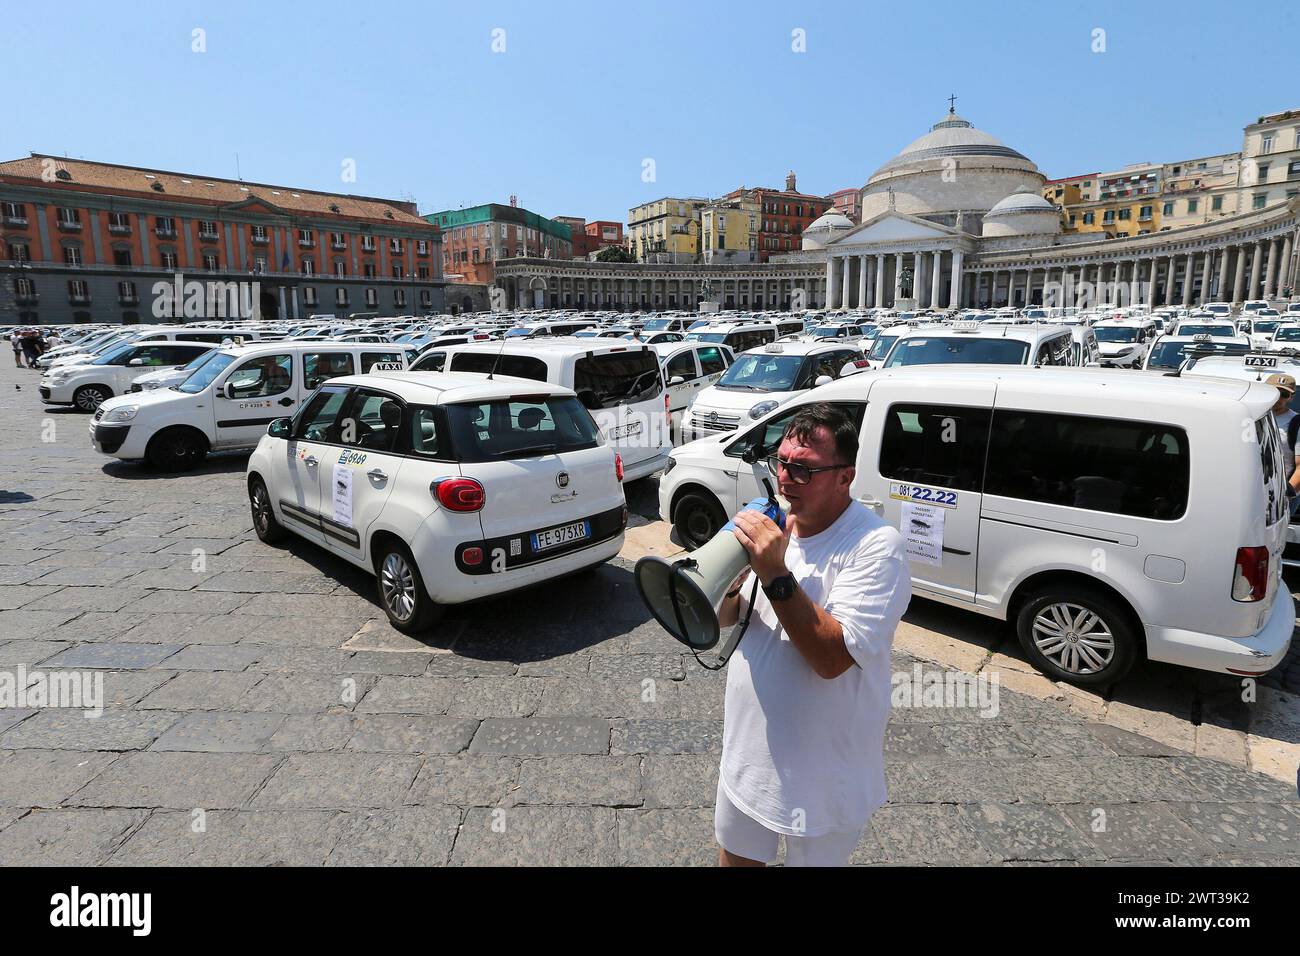 A taxi driver with a megaphone in Piazza Plebiscito in Naples, occupied by over 500 taxis due to the protest of taxi drivers, against the Italian gove Stock Photo